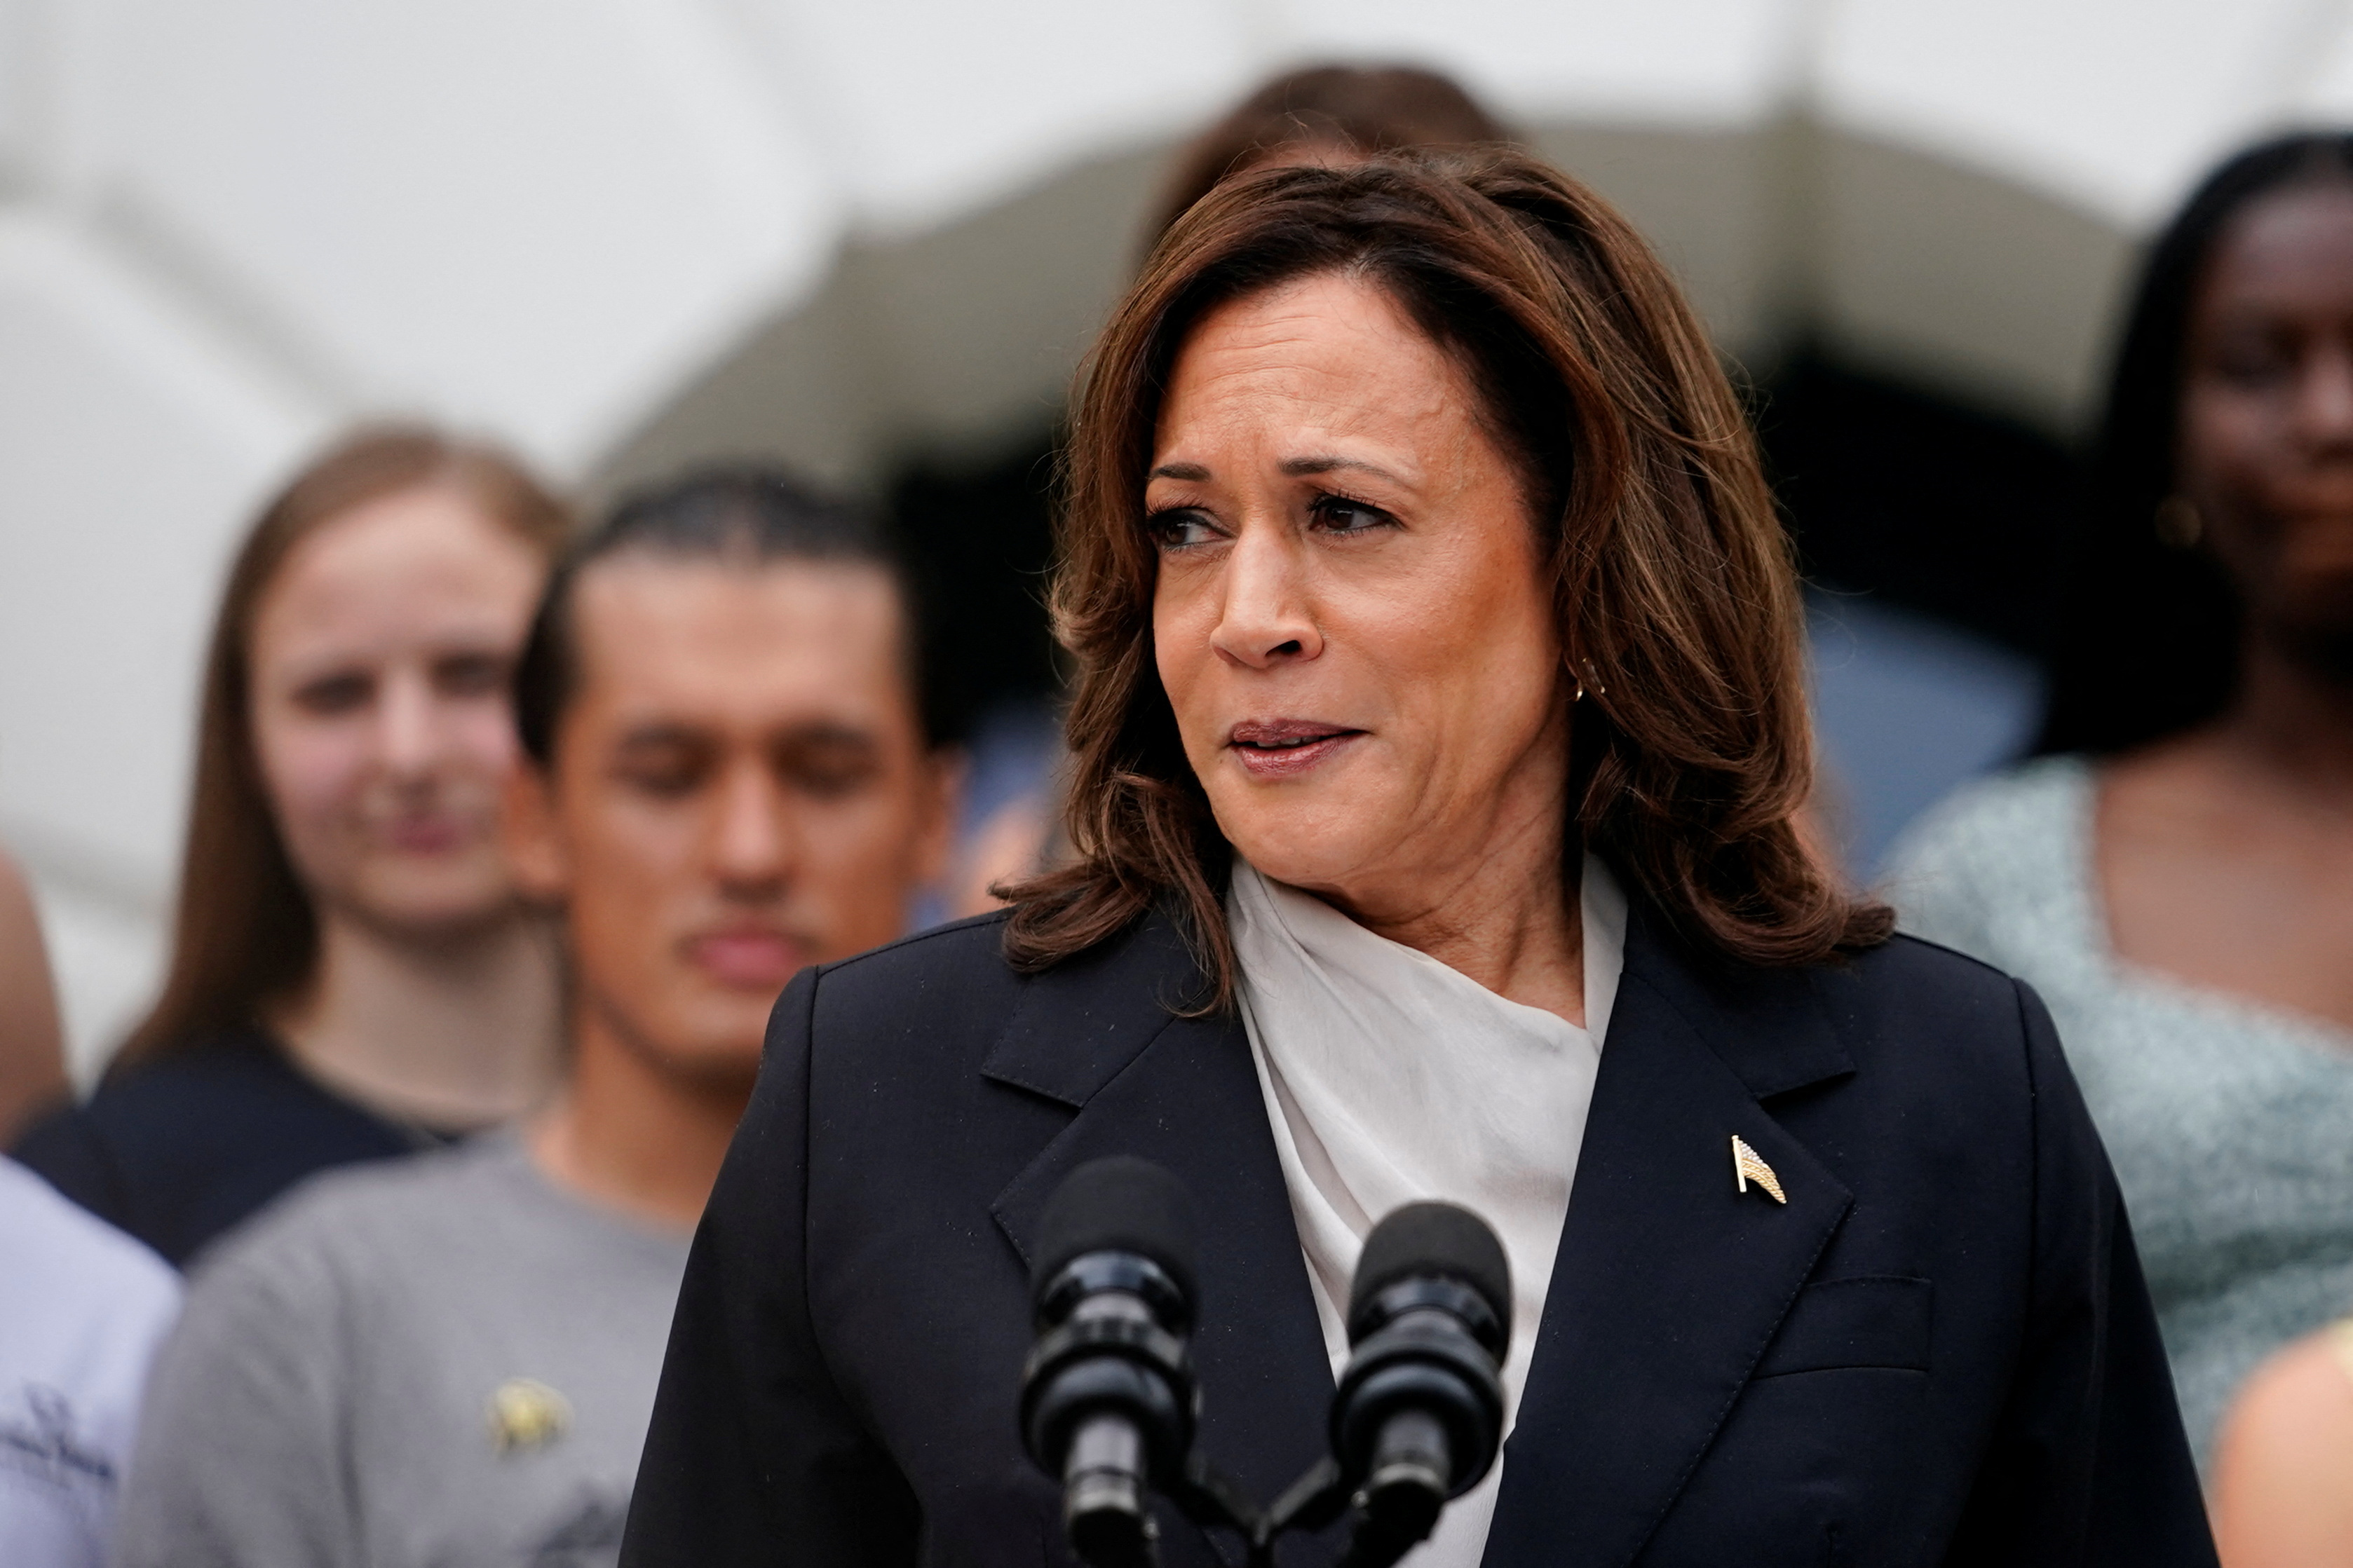 U.S. Vice President Kamala Harris delivers remarks to the women and men's National Collegiate Athletic Association (NCAA) Champion teams at the White House in Washington